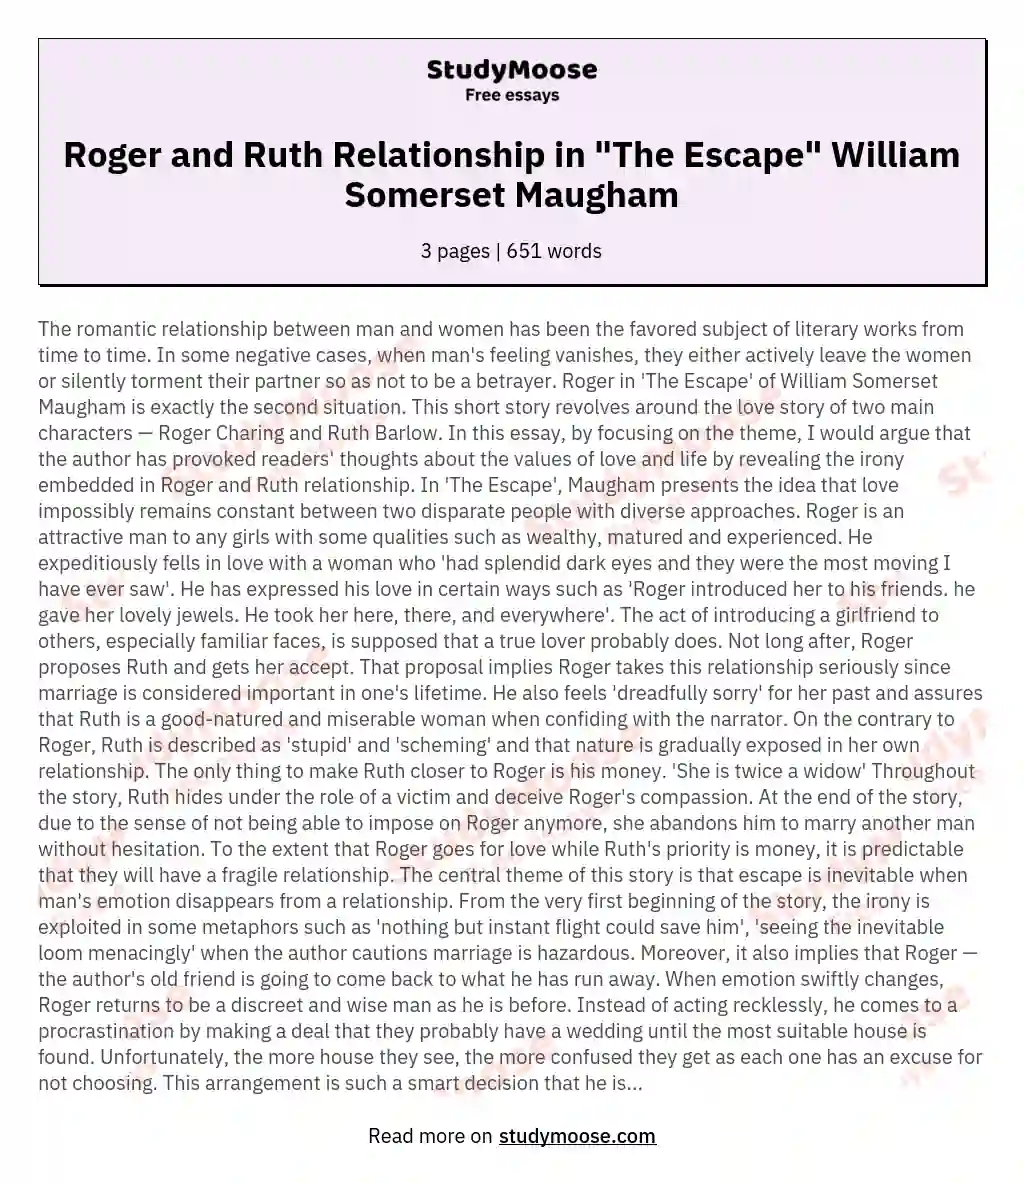 Roger and Ruth Relationship in "The Escape" William Somerset Maugham